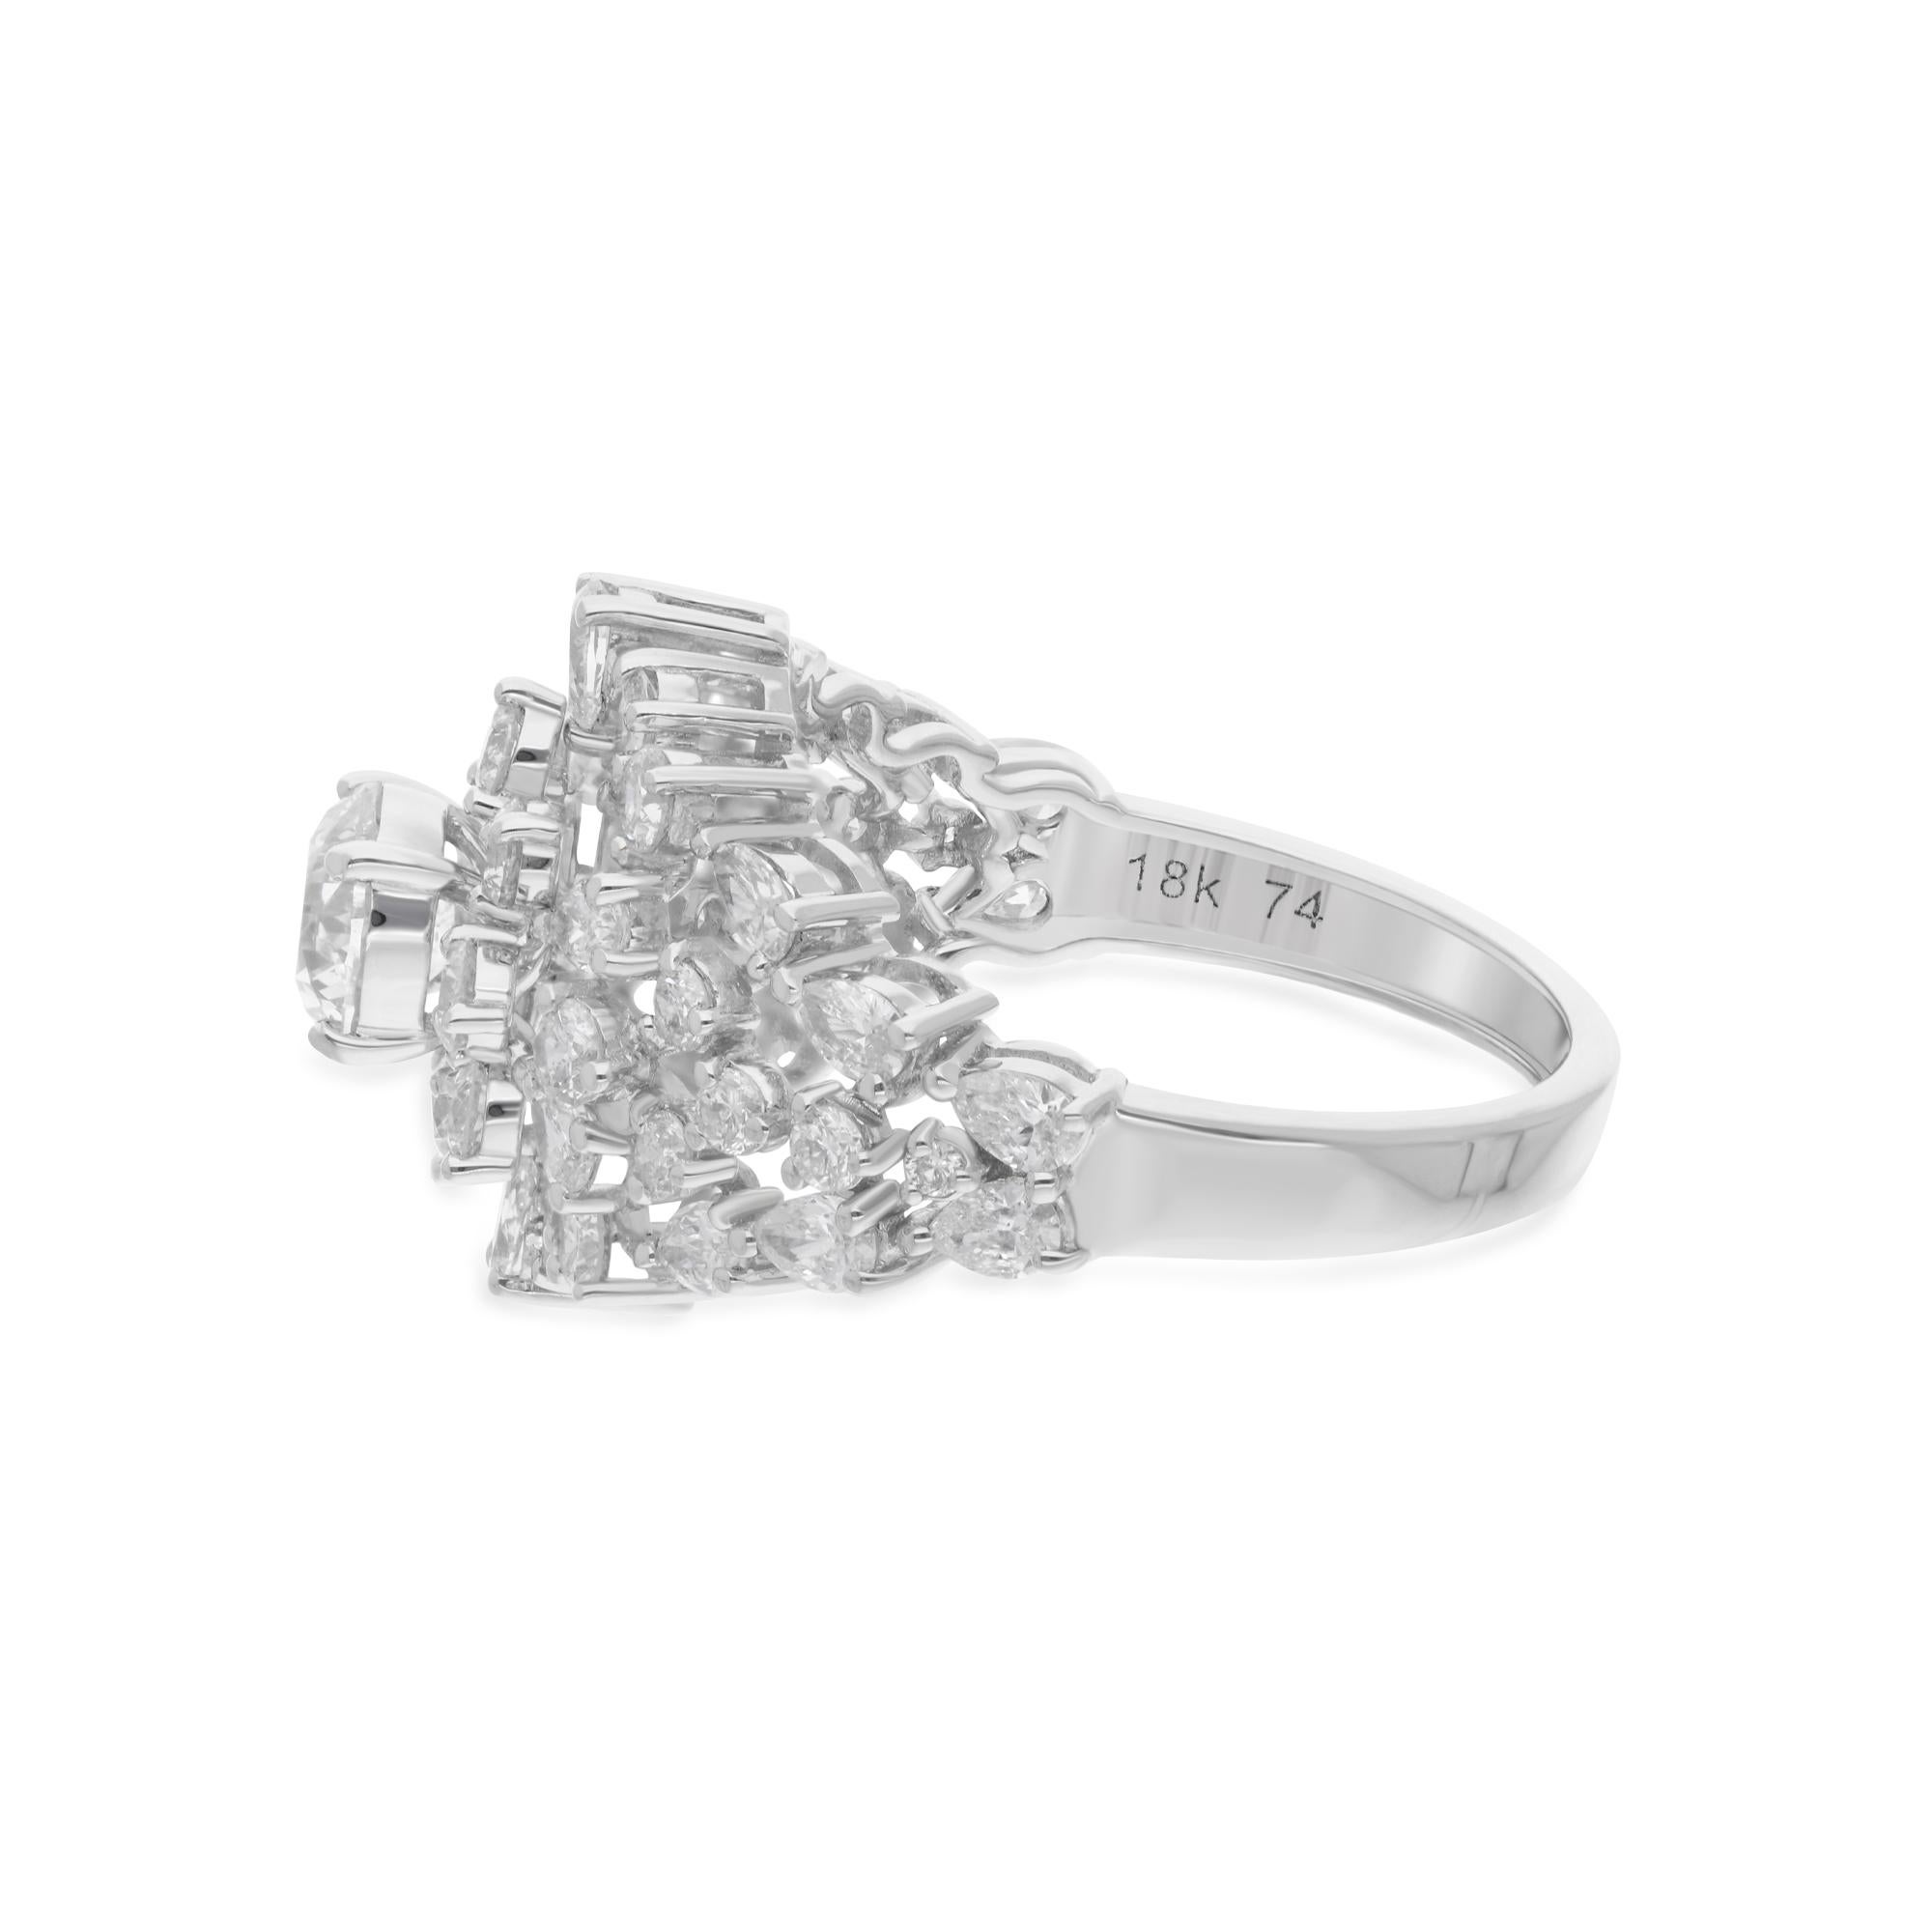 At the center of this captivating ring gleams a magnificent round diamond, boasting a generous weight of 2.57 carats. Its brilliant cut and impeccable clarity create a mesmerizing display of fire and sparkle, commanding attention with every